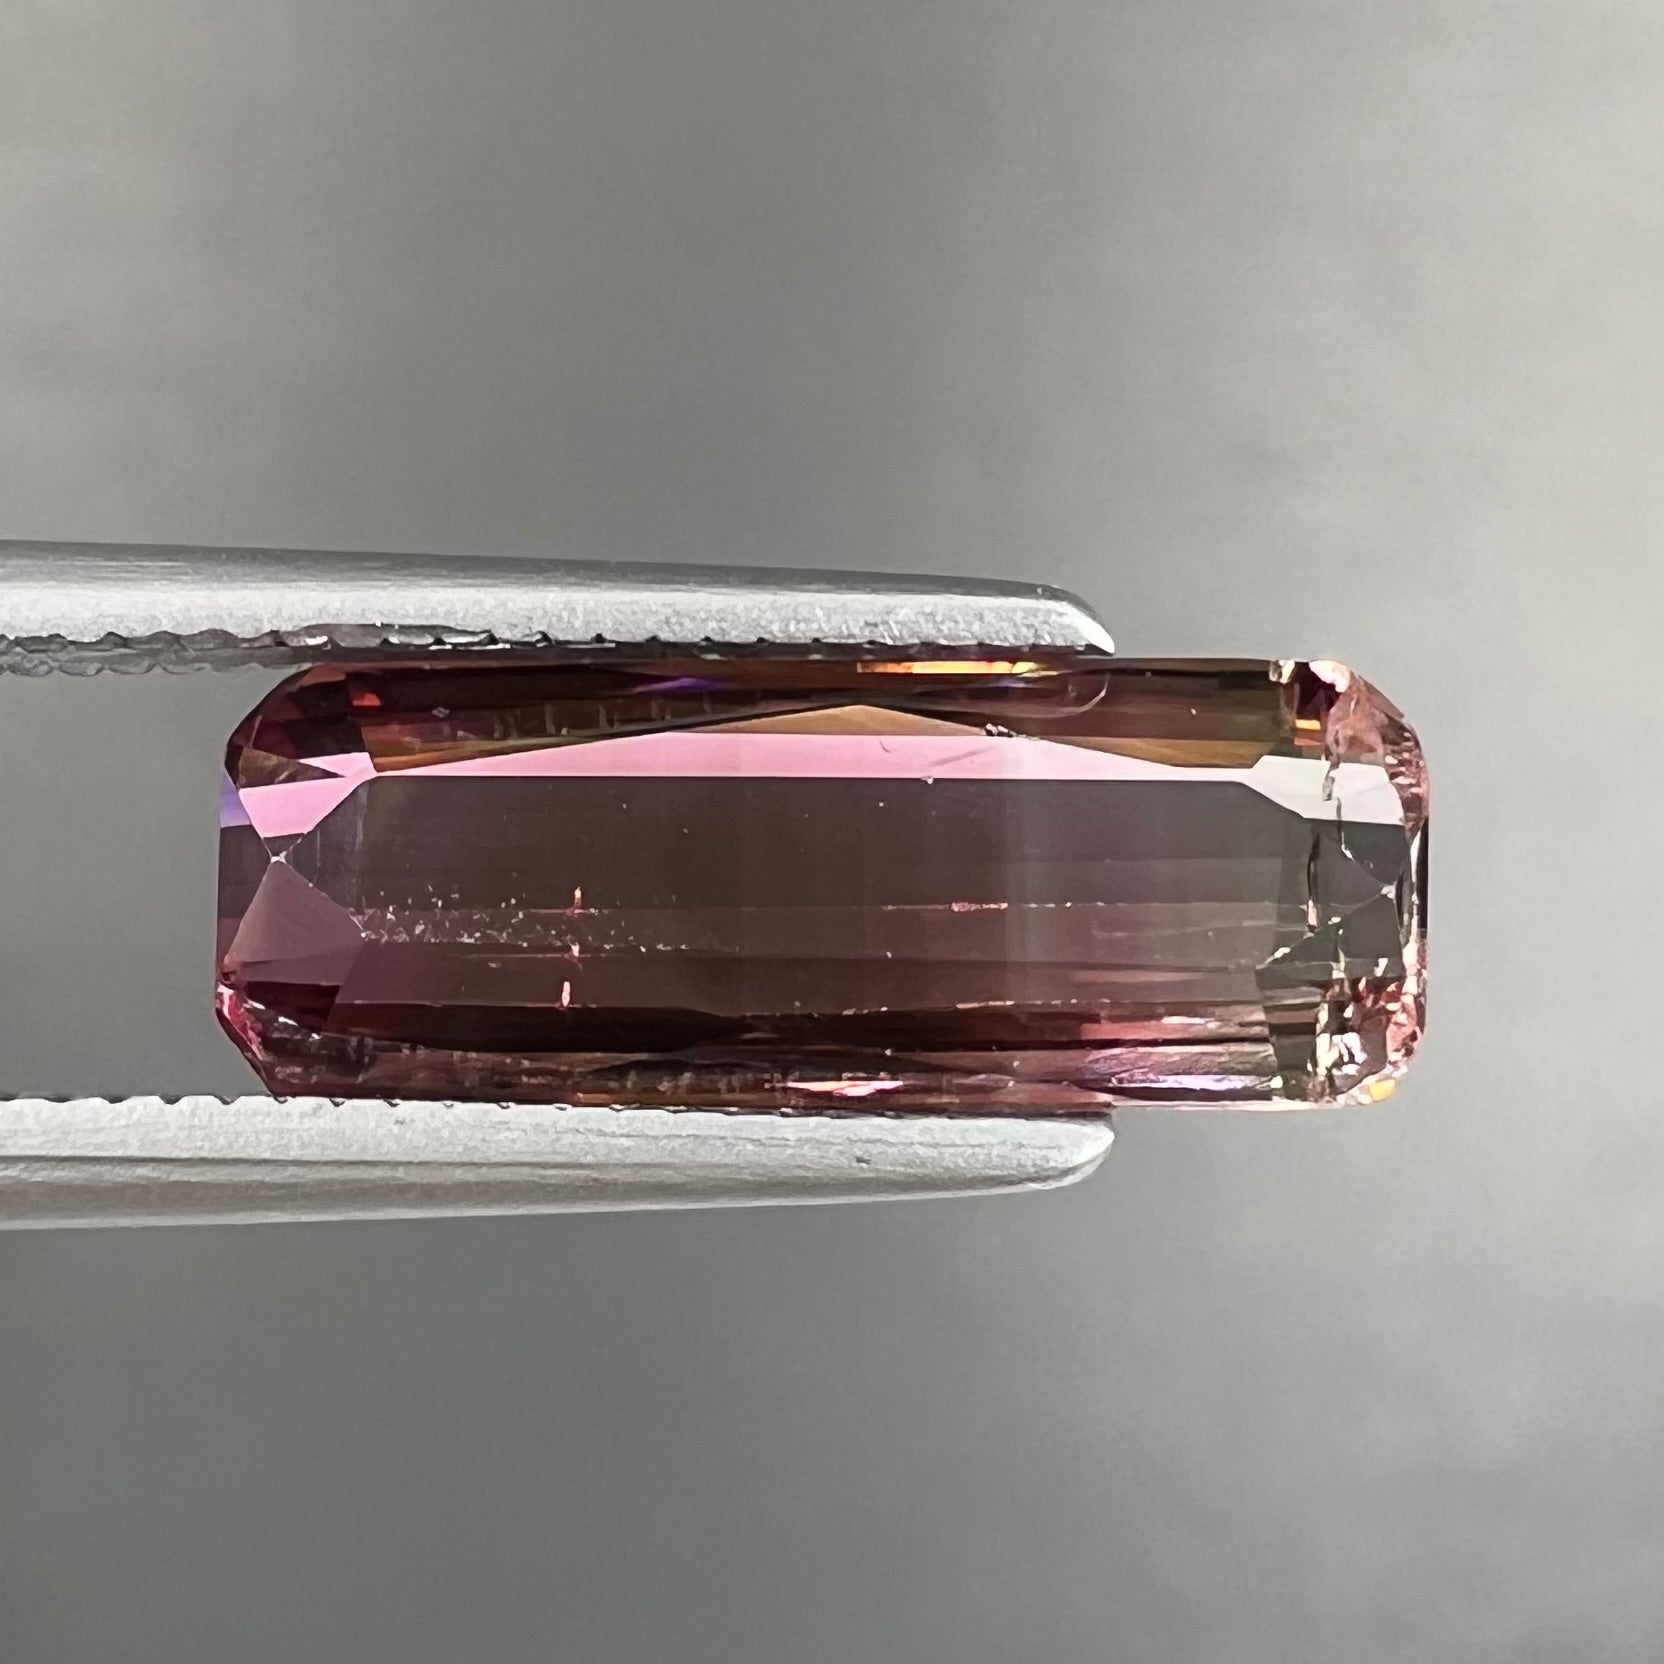 A loose, modified emerald cut tricolor tourmaline.  The stone transitions from pink to light pink to white colors.